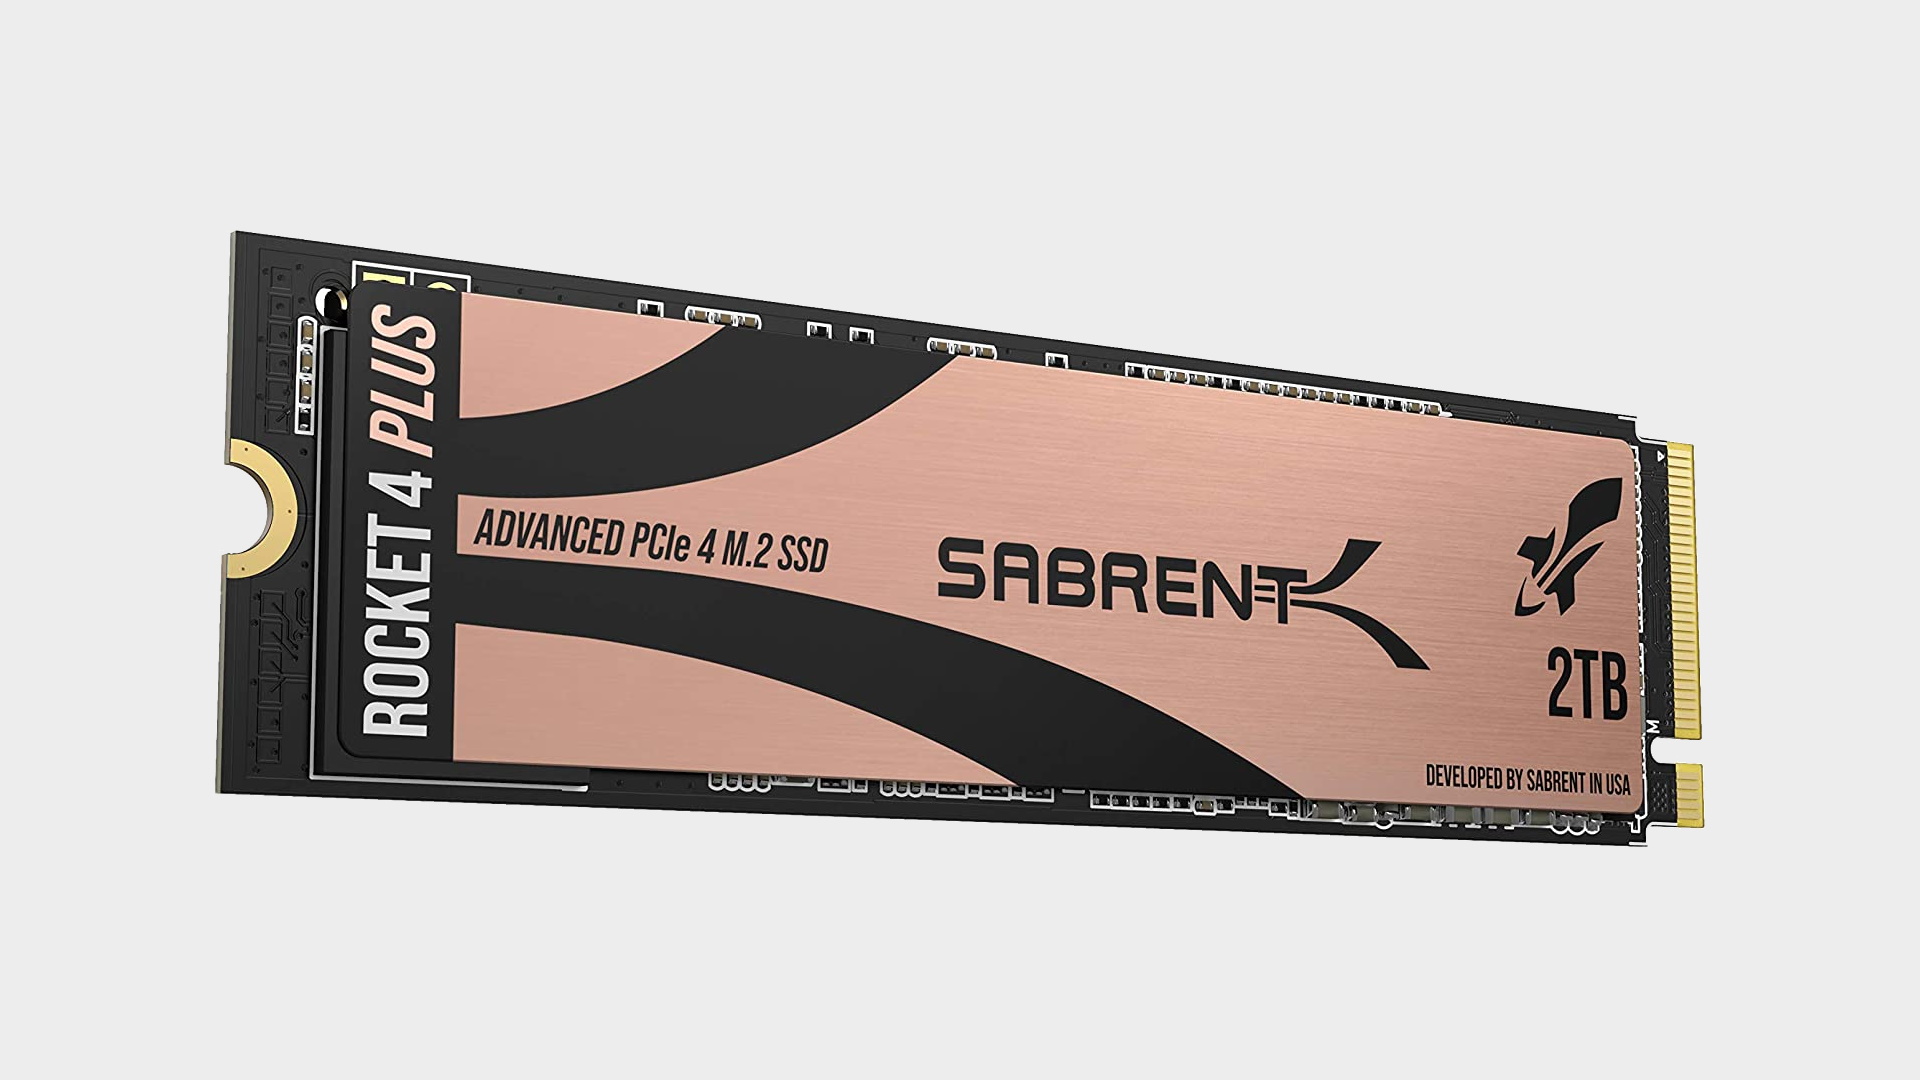 Image of the Sabrent Rocket 4 Plus 2TB in front of a gray background.